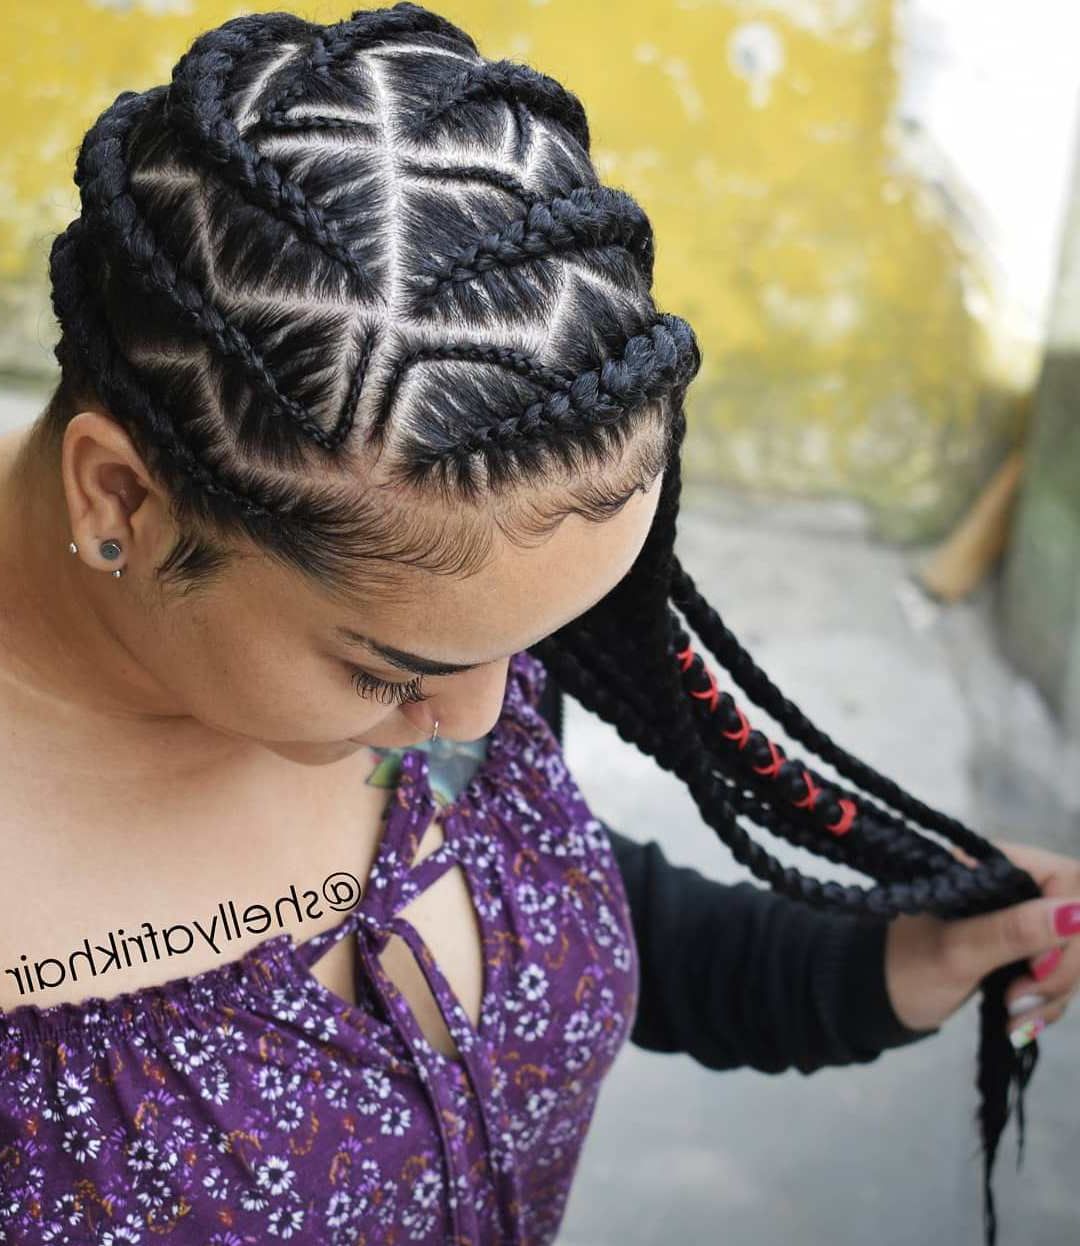 Widely Used Thin Lemonade Braided Hairstyles In An Updo In 20 Head Turning Lemonade Braid Styles For All Ages (View 3 of 20)